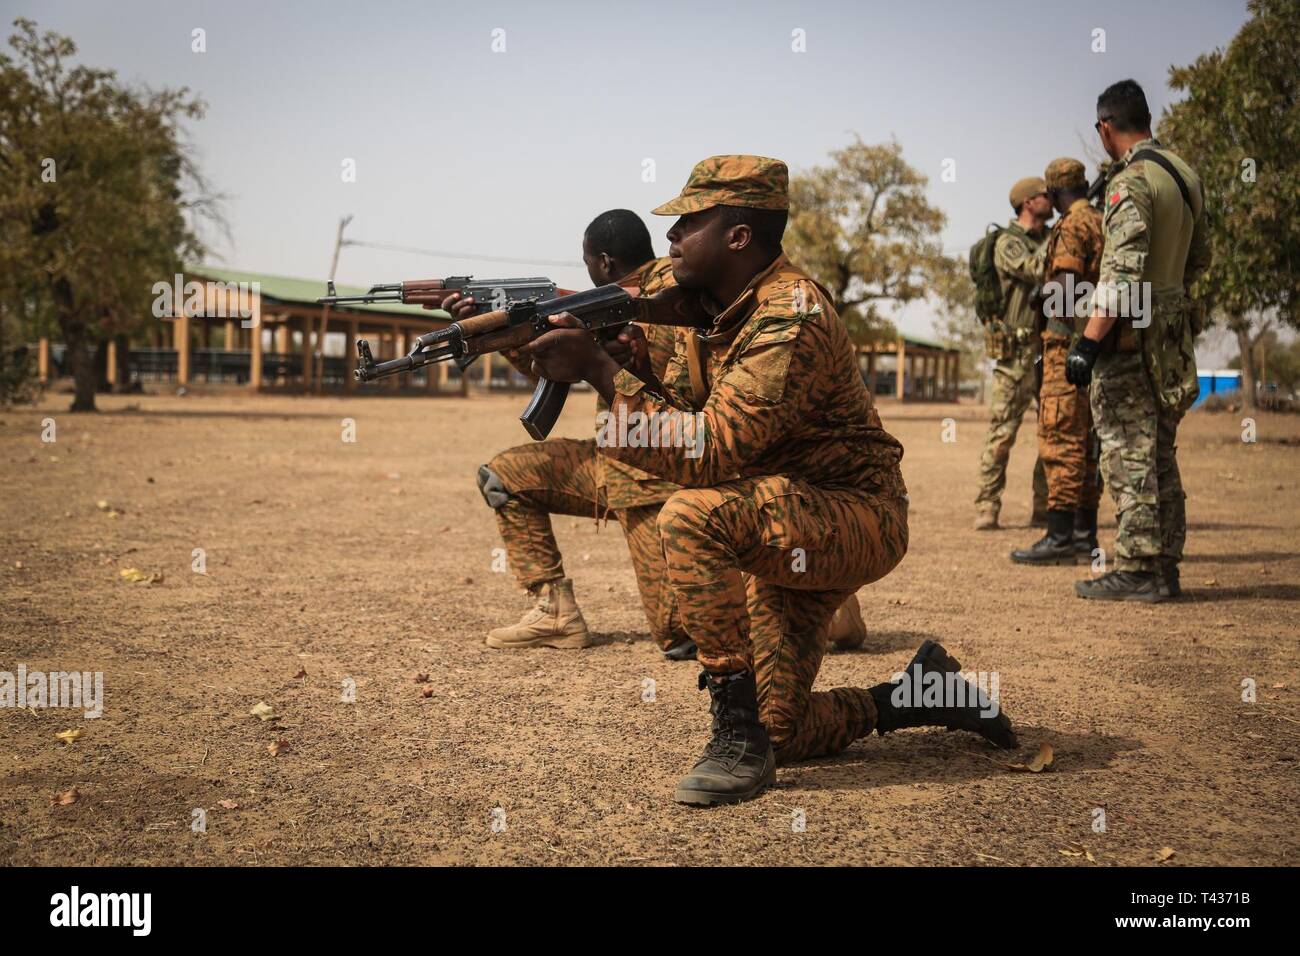 Portuguese Special Forces soldiers train Burkina Faso soldiers on basic battle movements in base camp Loumbila, in Burkina Faso on Feb. 21, 2019. The training event is part of exercise Flintlock 19, where many Western and African partners are participating in multinational training events. Stock Photo